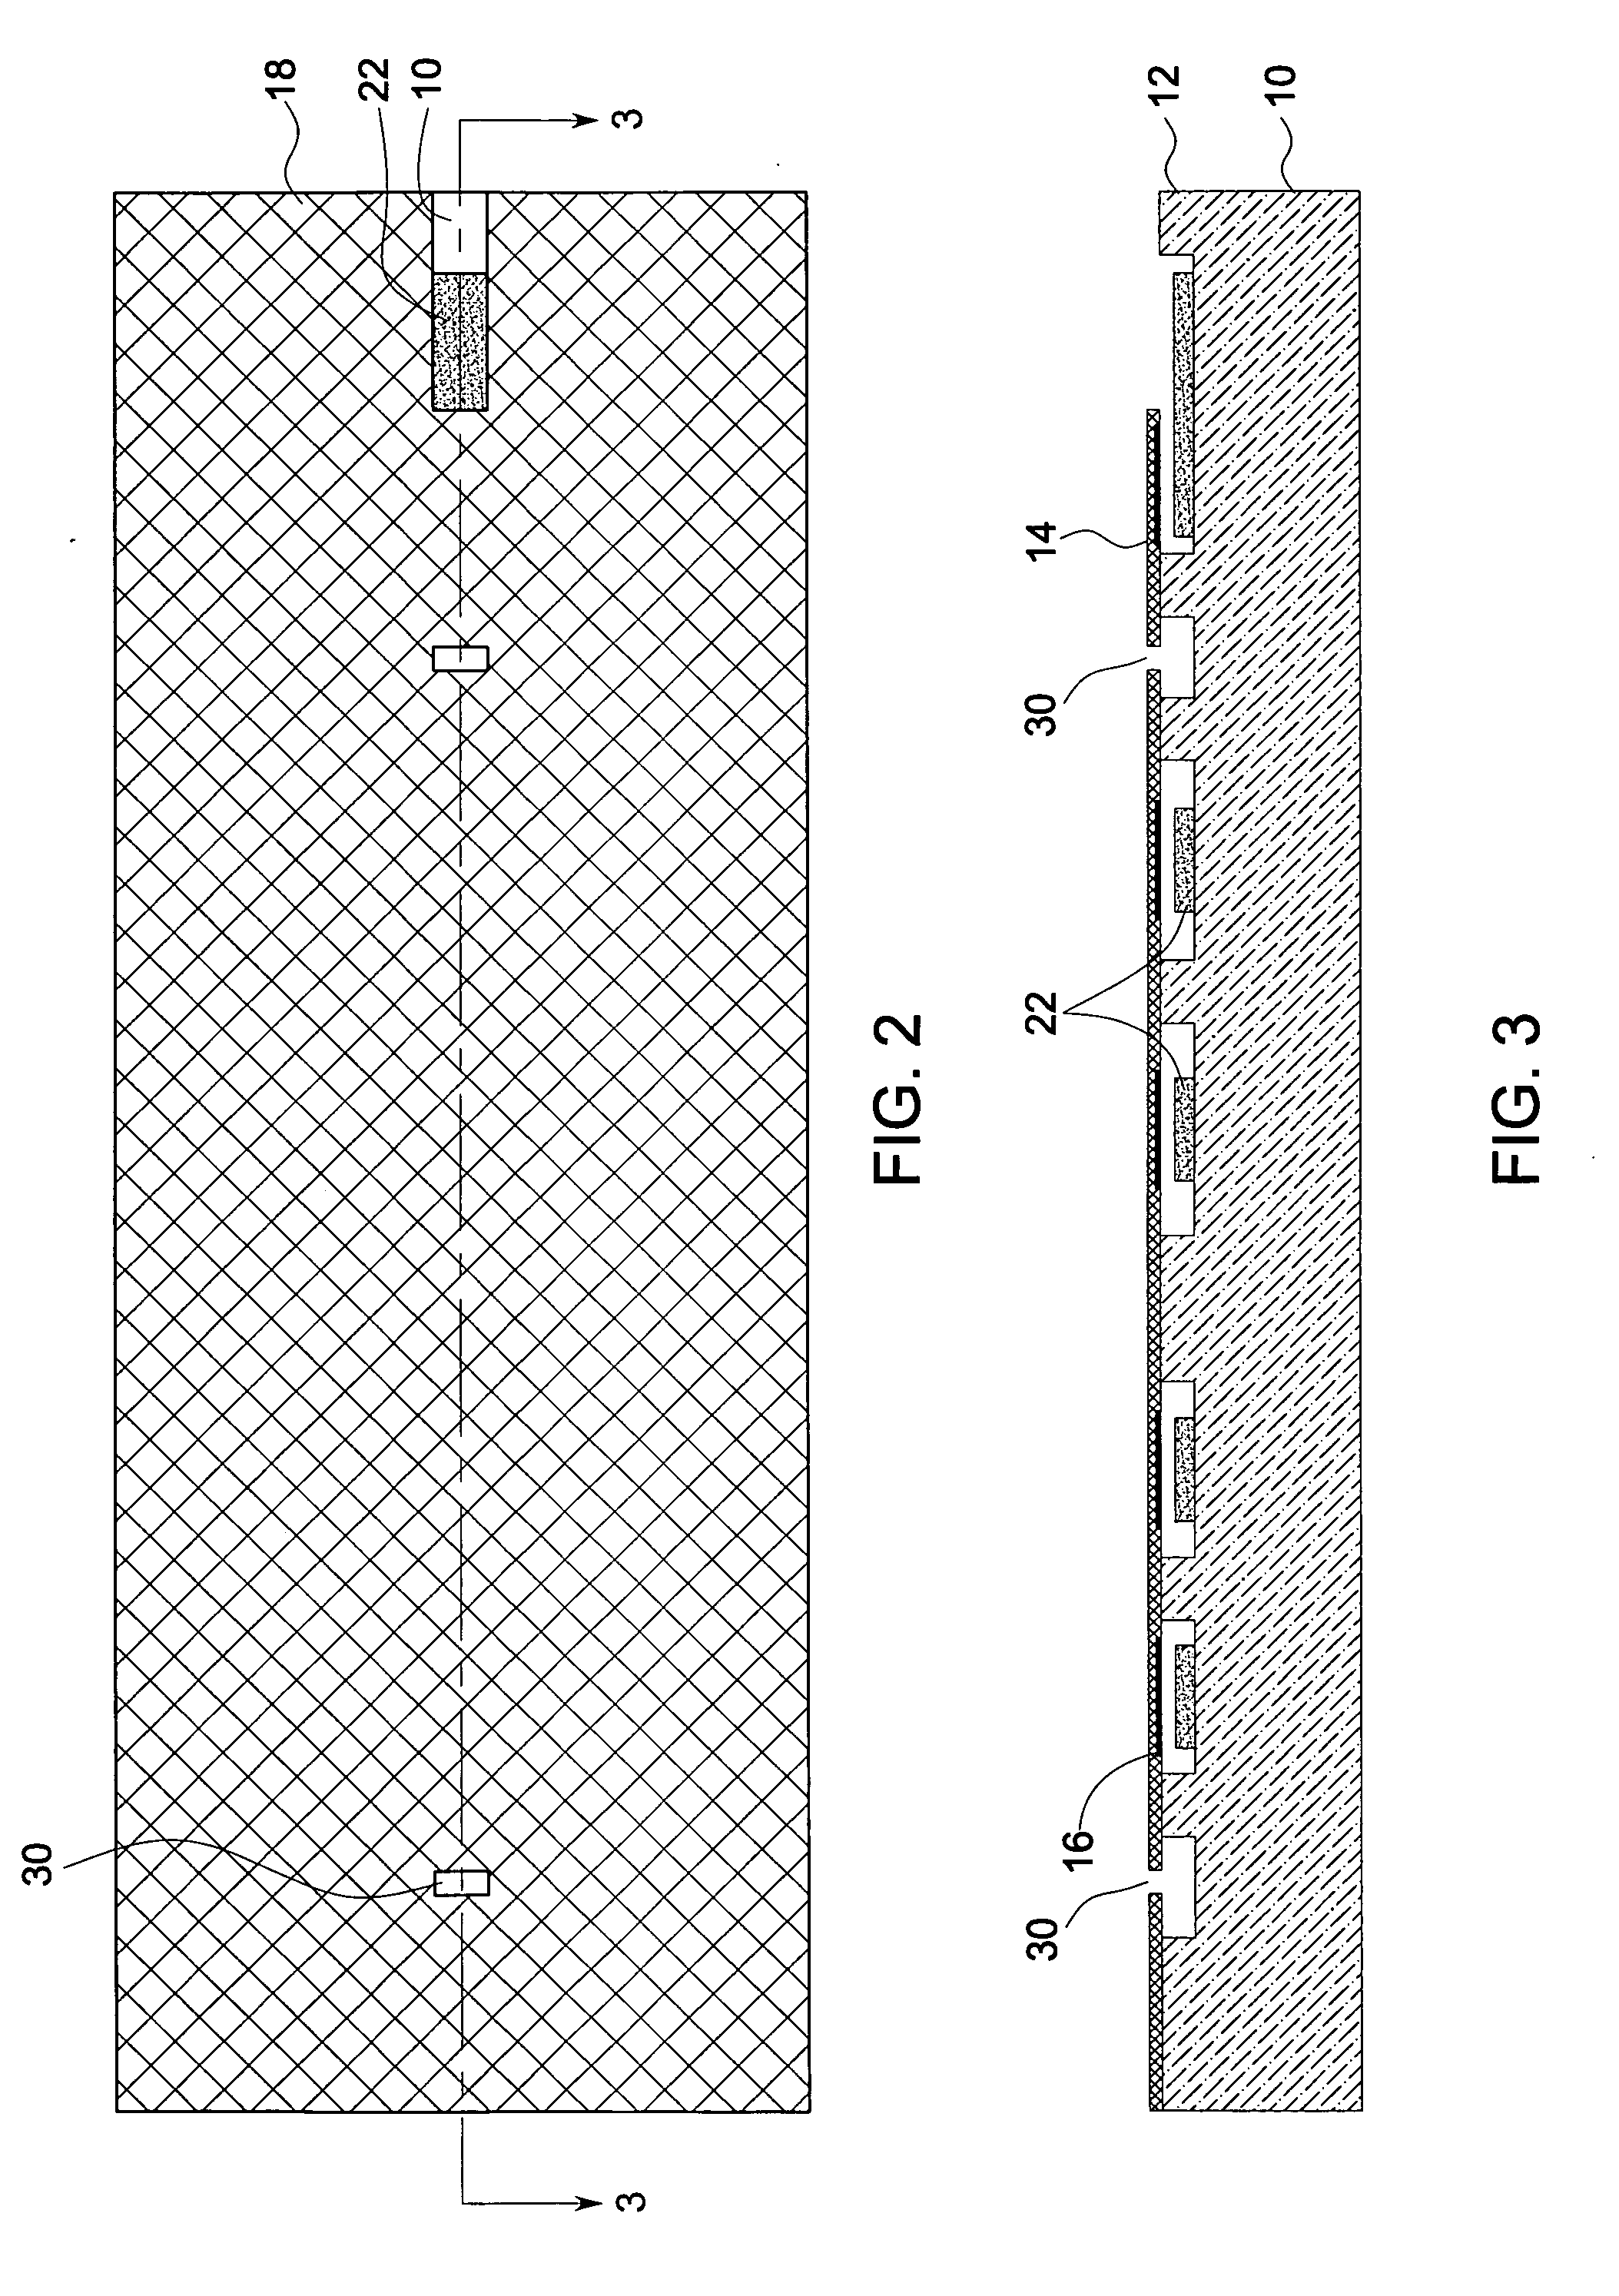 Capacitive micromachined ultrasound transducer and methods of making the same